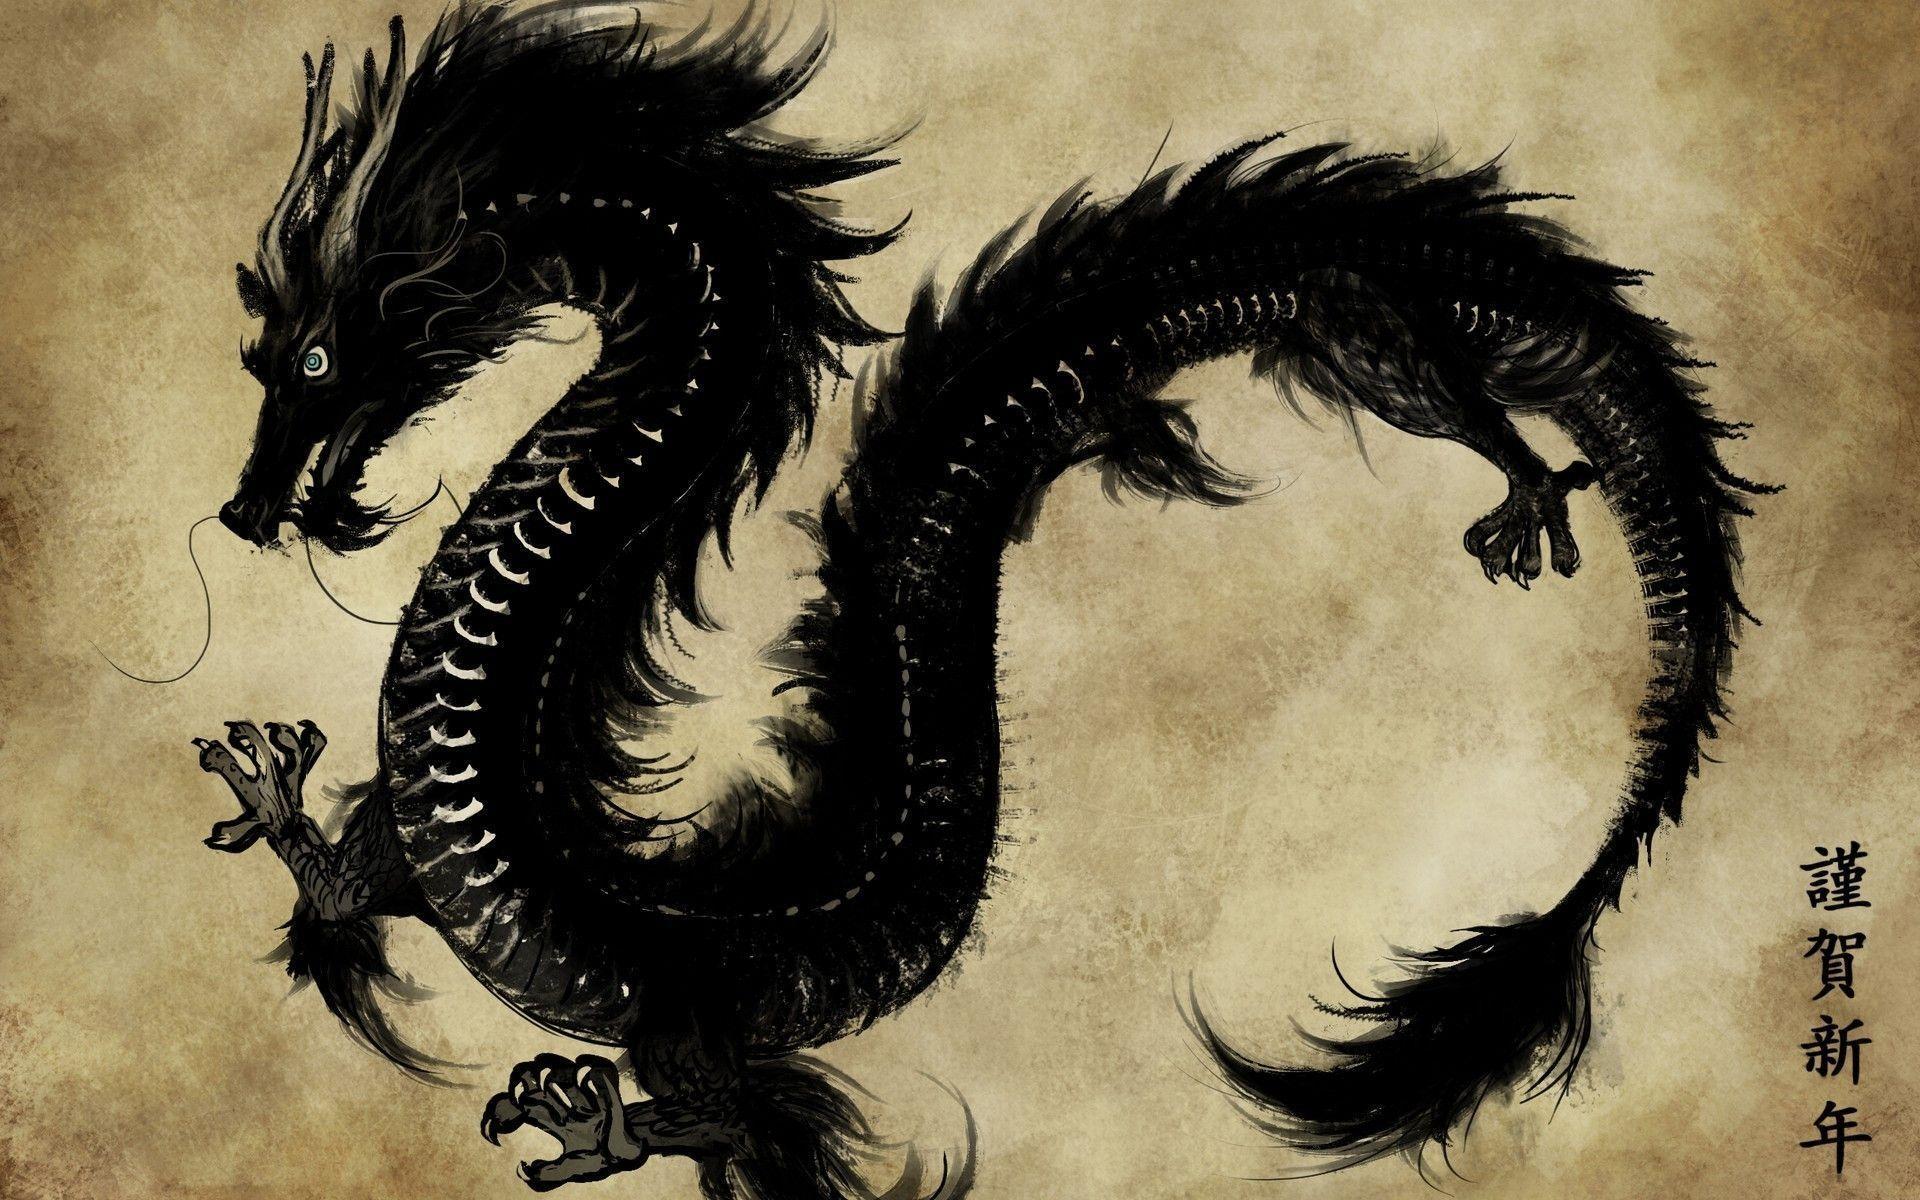 Dragon in ancient China Wallpaper. High Quality Wallpaper